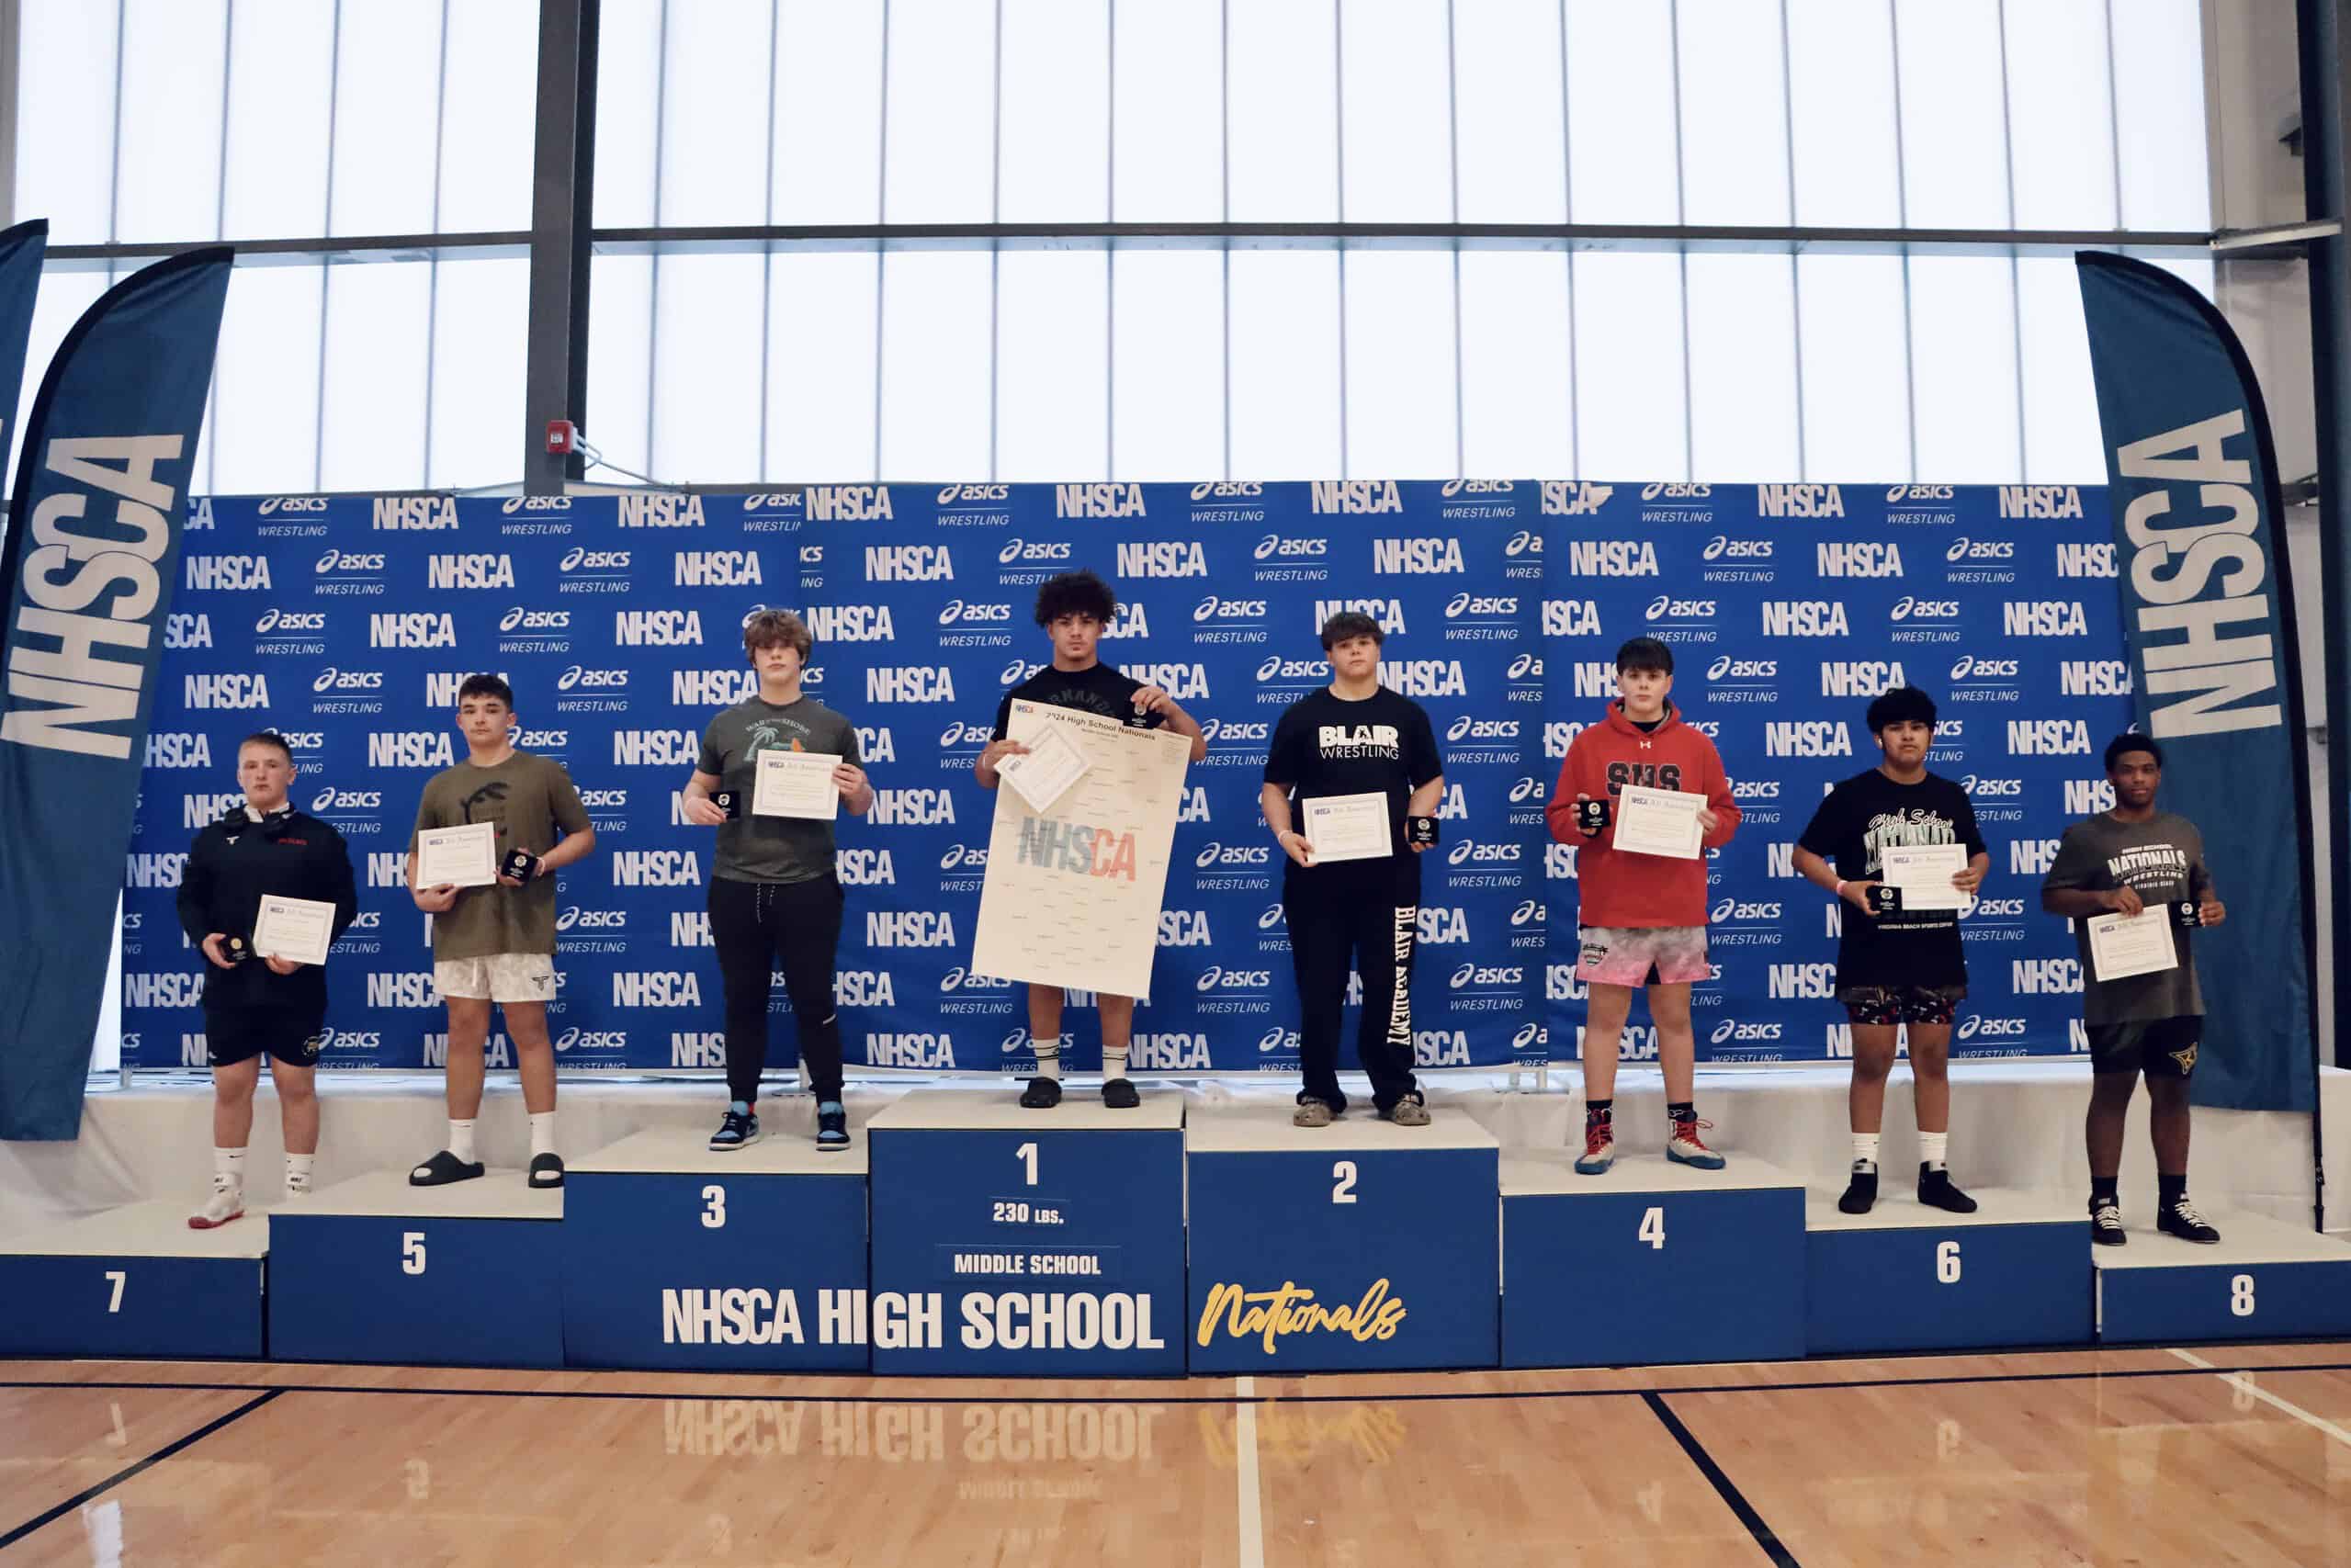 National Champion Jeremiah Chavis stands atop the podium at NHSCA Middle School Nationals. (Photo Courtesy of NHSCA)